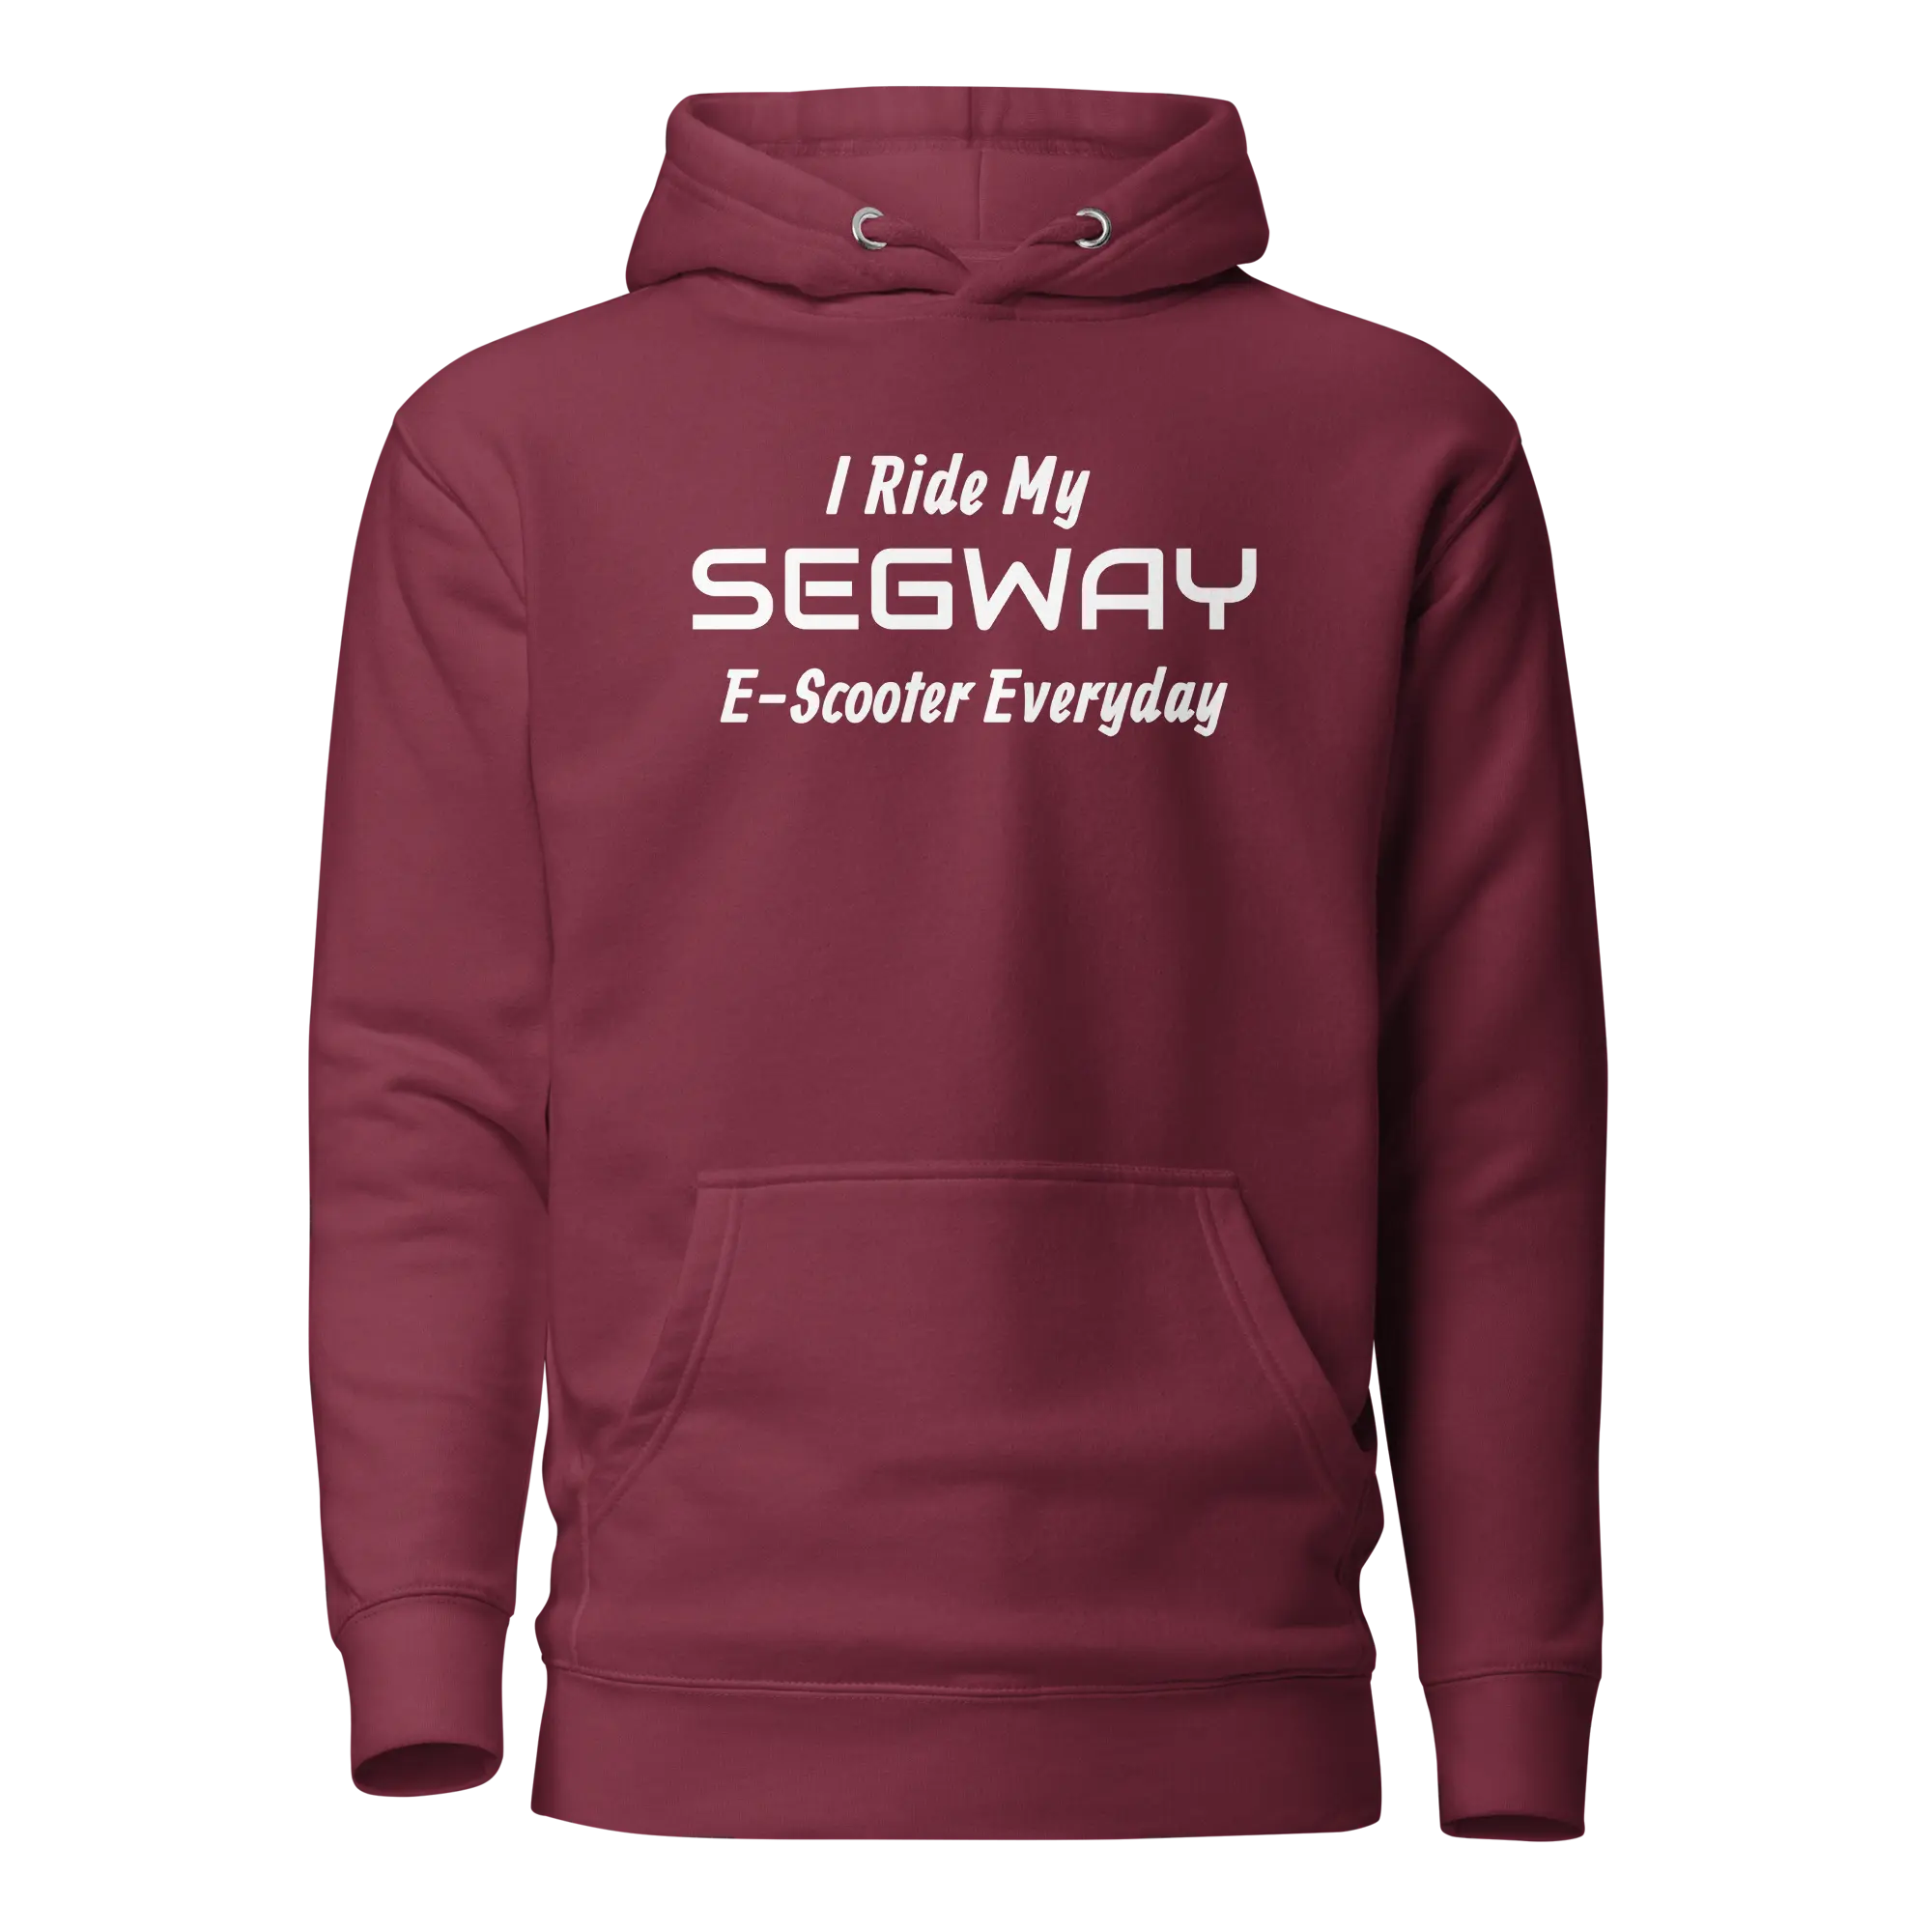 E-Scooter Graphic Hoodie: I Ride My SEGWAY E-Scooter Everyday (Maroon)